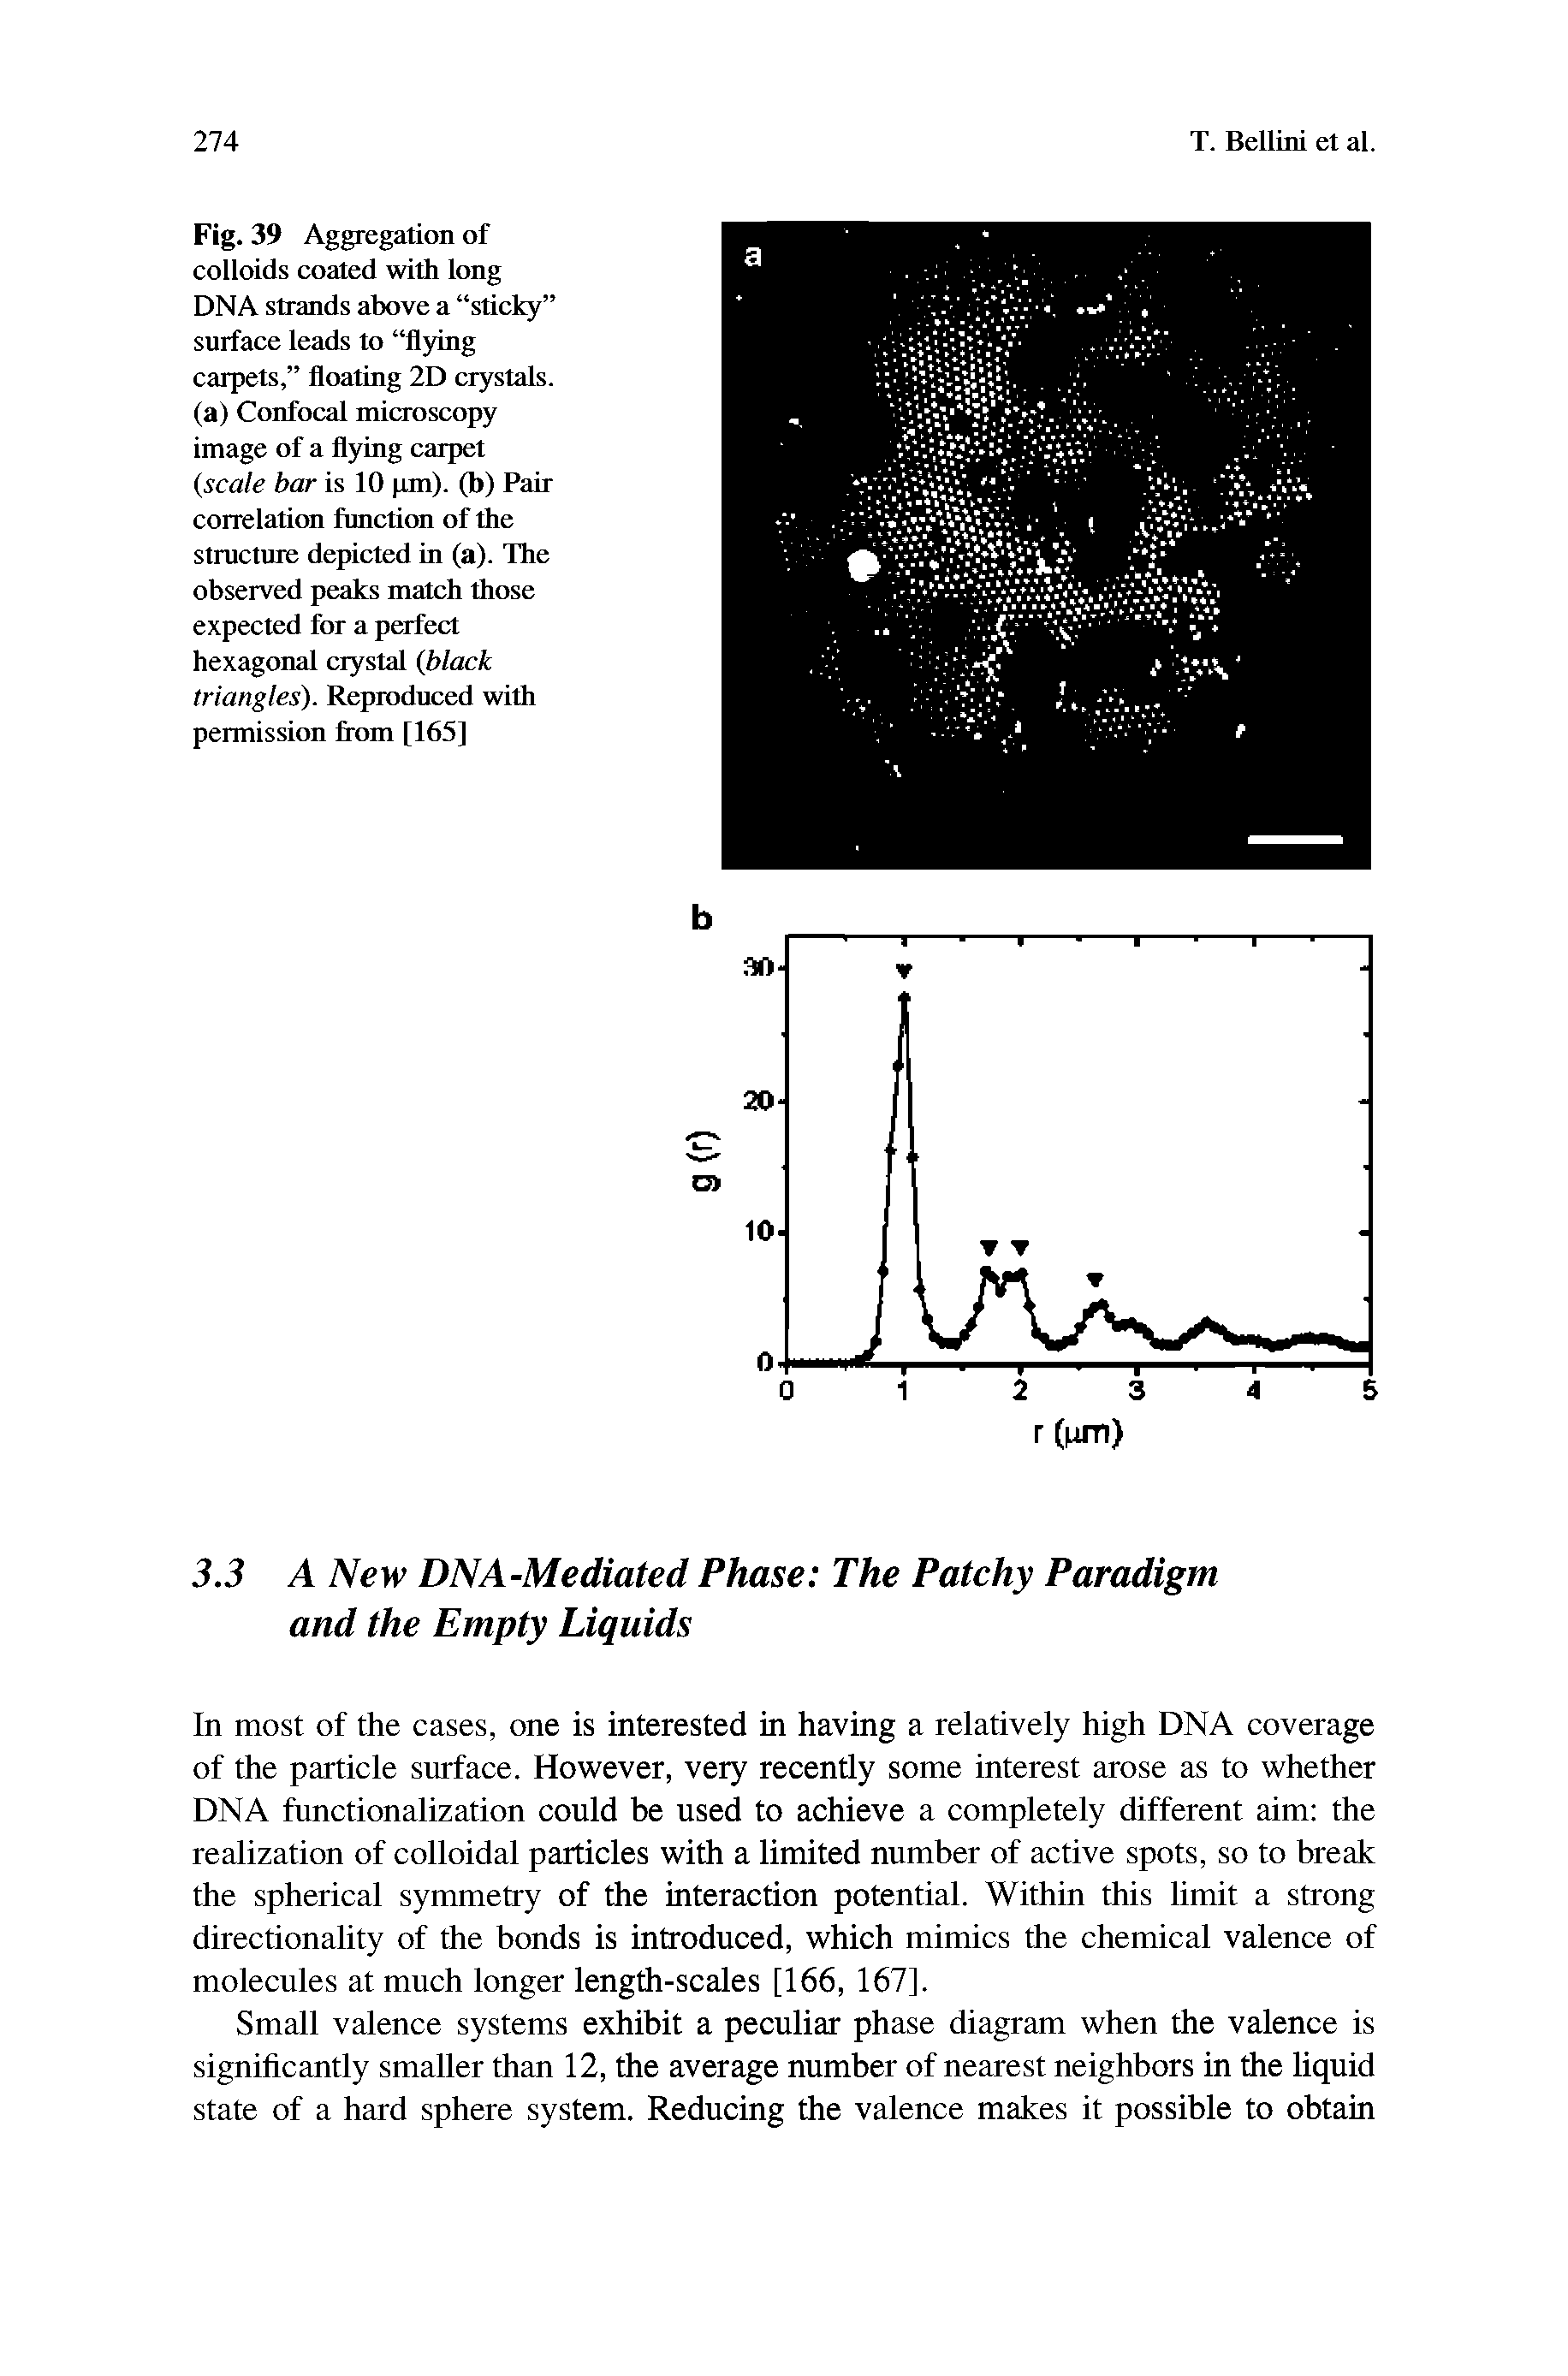 Fig. 39 Aggregation of colloids coated with long DNA strands above a sticky surface leads to flying carpets, floating 2D crystals, (a) Confocal microscopy image of a flying carpet (scale bar is 10 pm), (b) Pair correlation function of the structure depicted in (a). The observed peaks match those expected for a perfect hexagonal crystal (black triangles). Reproduced with permission from [165]...